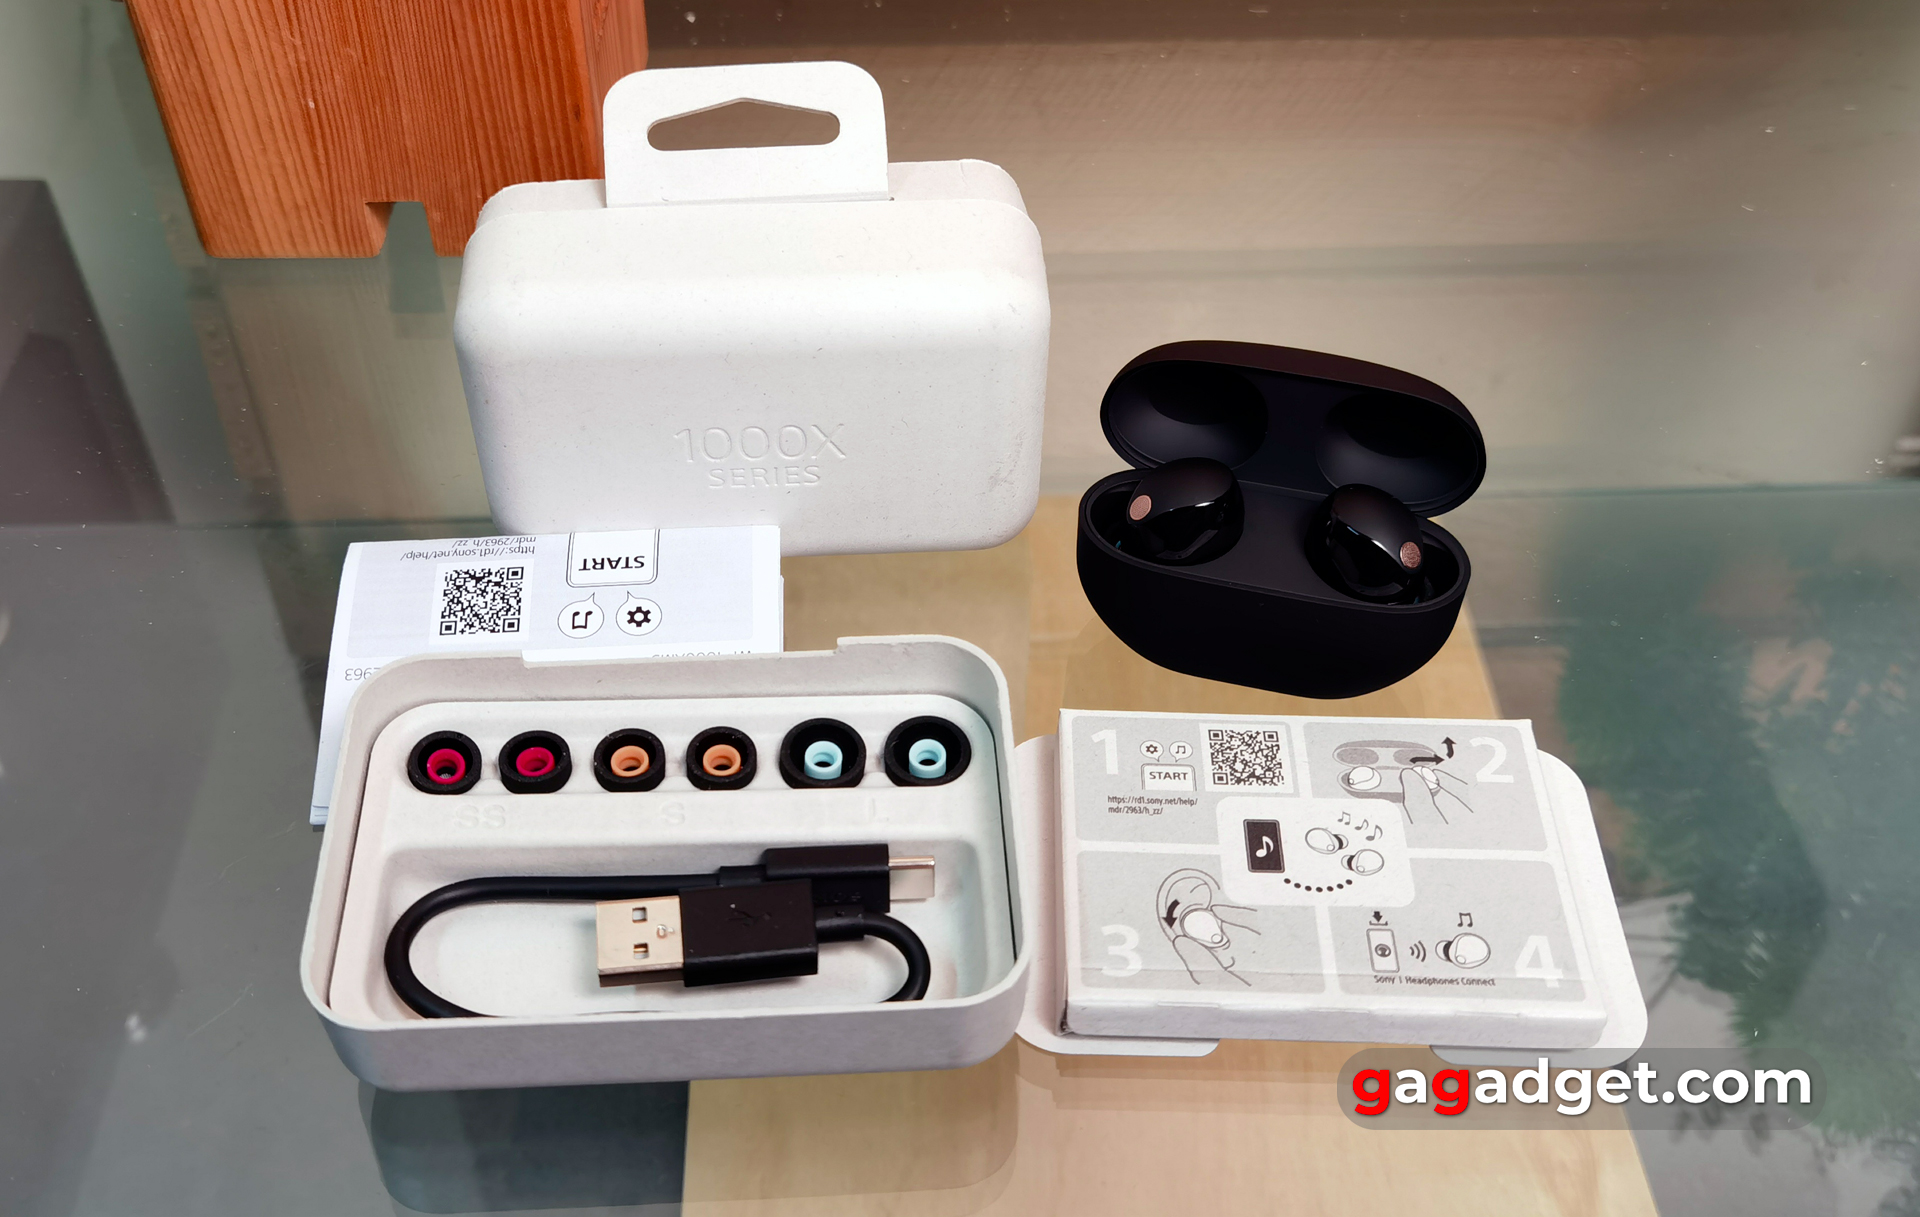 Sony WF-1000XM5: New details emerge for upcoming flagship TWS earbuds -   News